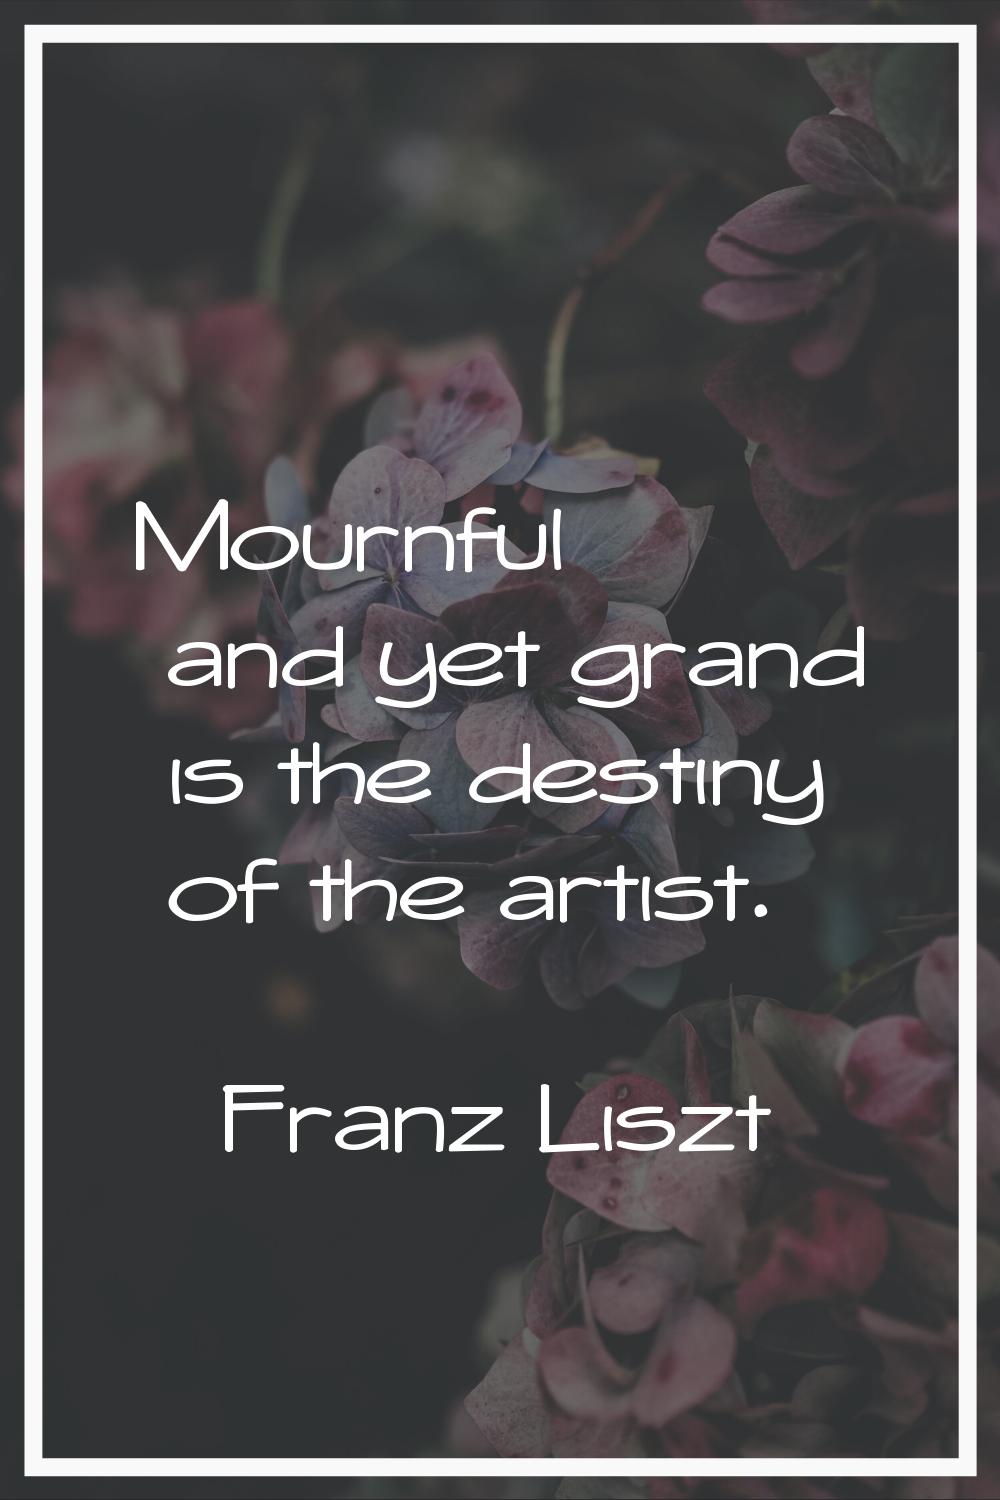 Mournful and yet grand is the destiny of the artist.